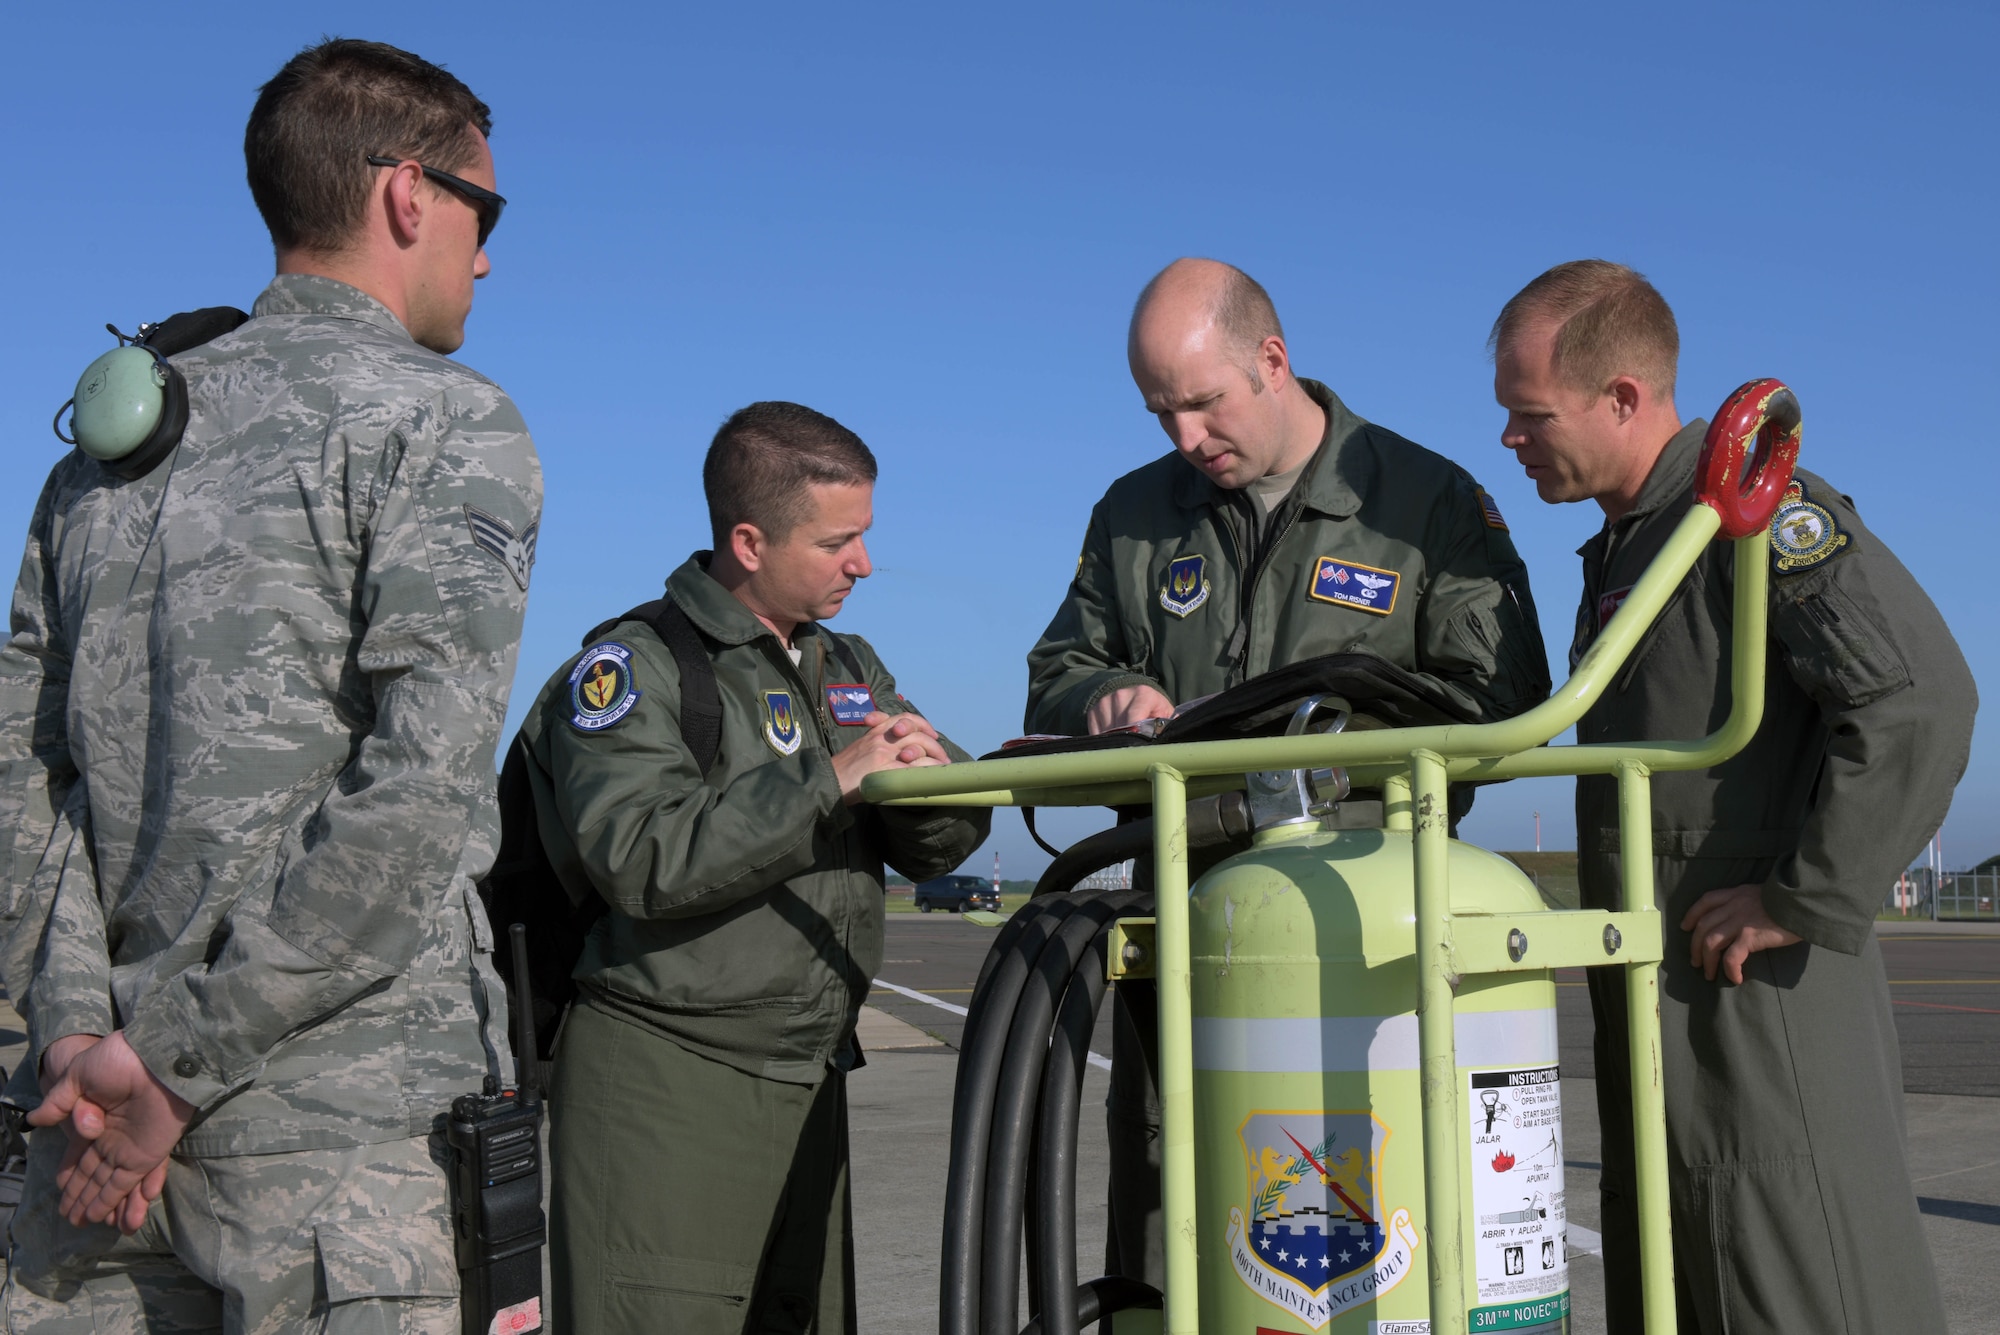 Airmen assigned to the 100th Air Refueling Wing, RAF Mildenhall, England, go over a pre-flight checklist prior to a refueling mission in support of the 75th anniversary commemoration of D-Day, at RAF Mildenhall, June 6, 2019. As seen during World War II, no nation can confront combat operations alone – and U.S. European Command with its subordinate components remain engaged, postured and ready to respond to threats as they arise. (U.S. Air Force photo by Senior Airman Benjamin Cooper)